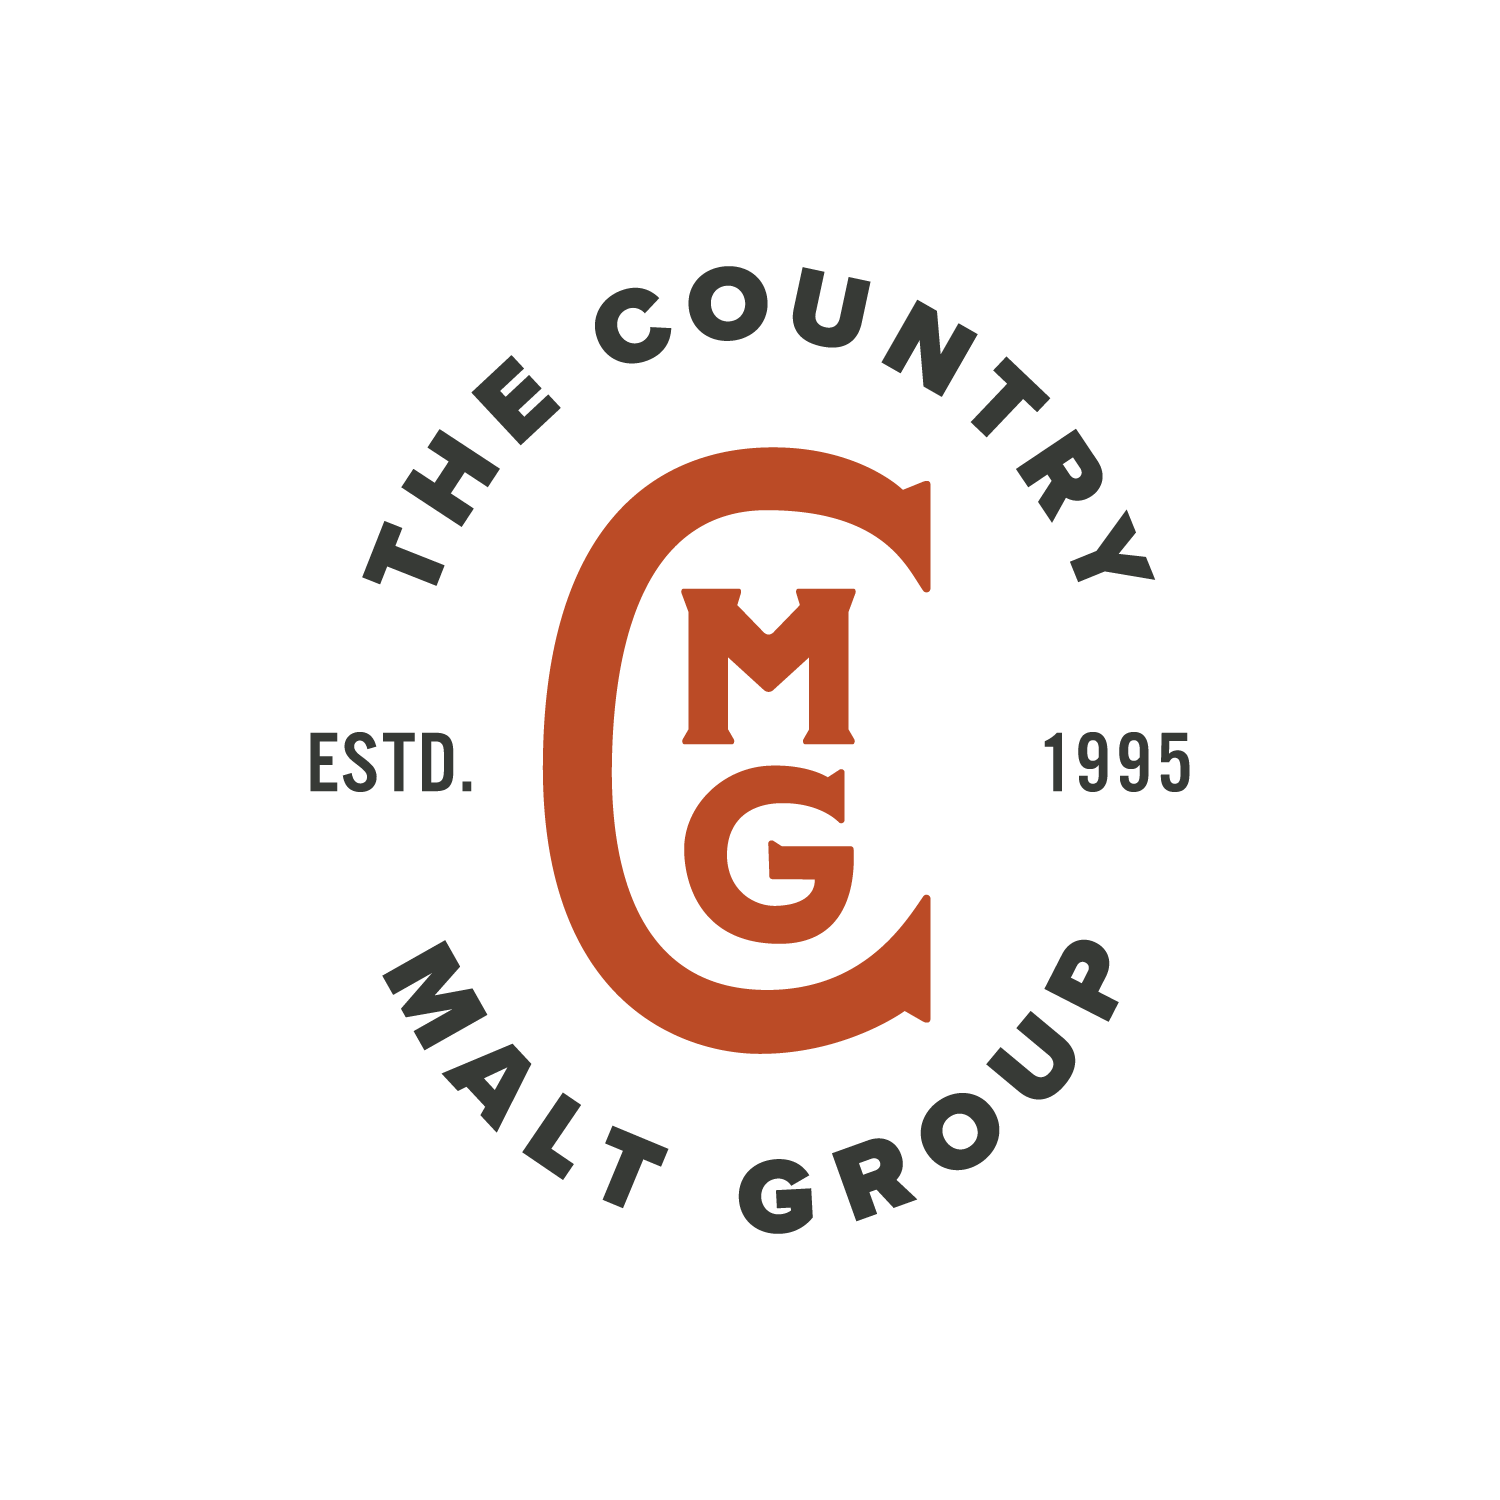 The Country Malt Group